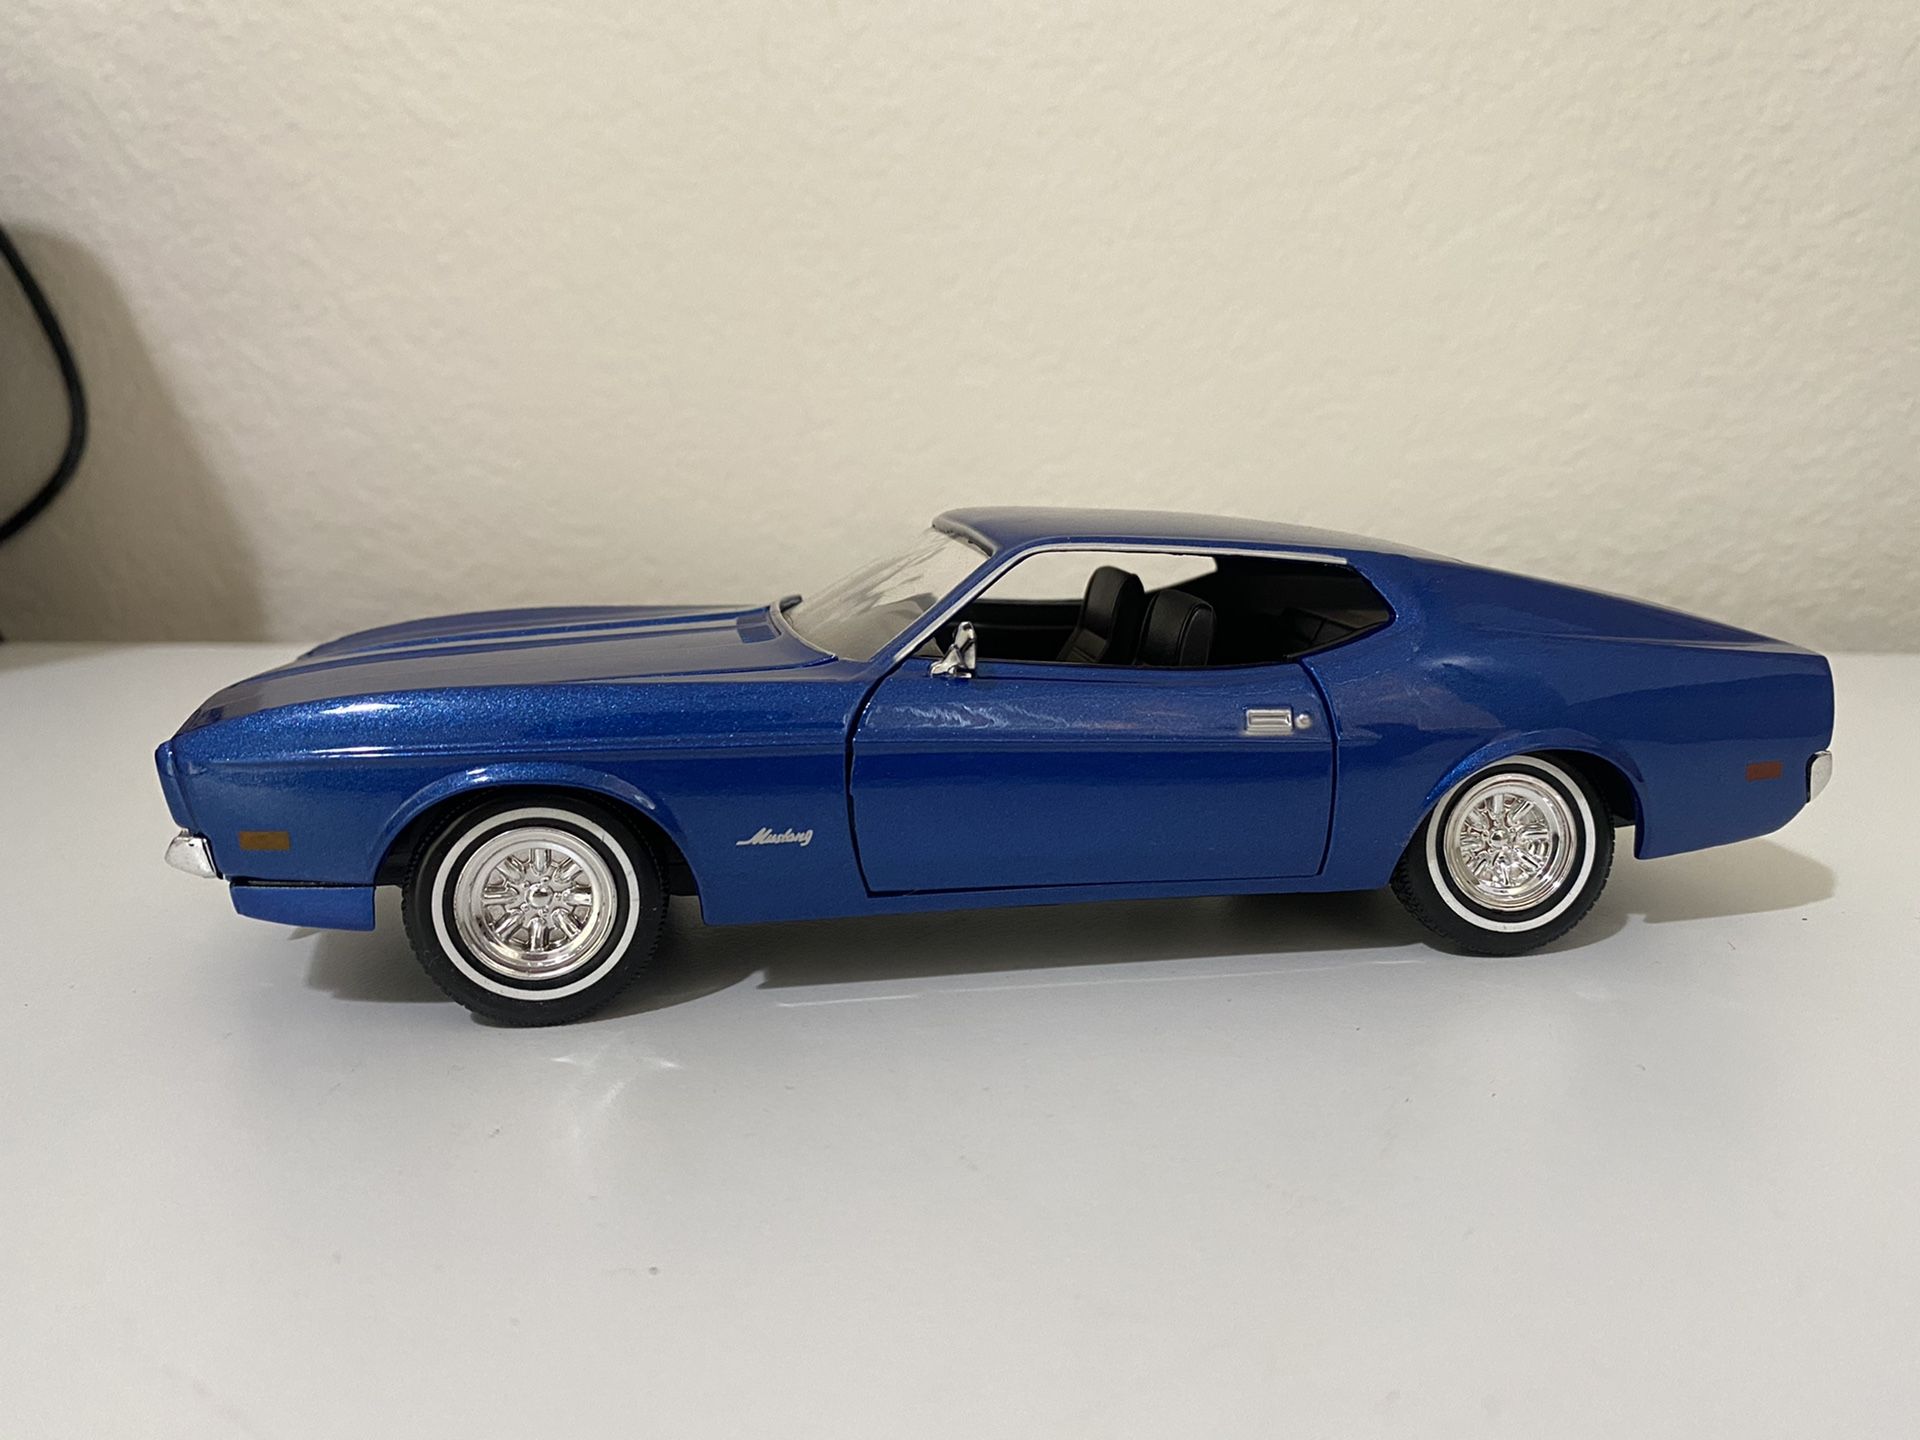 Diecast model 1971 Ford Mustang Sportsroof 1:24